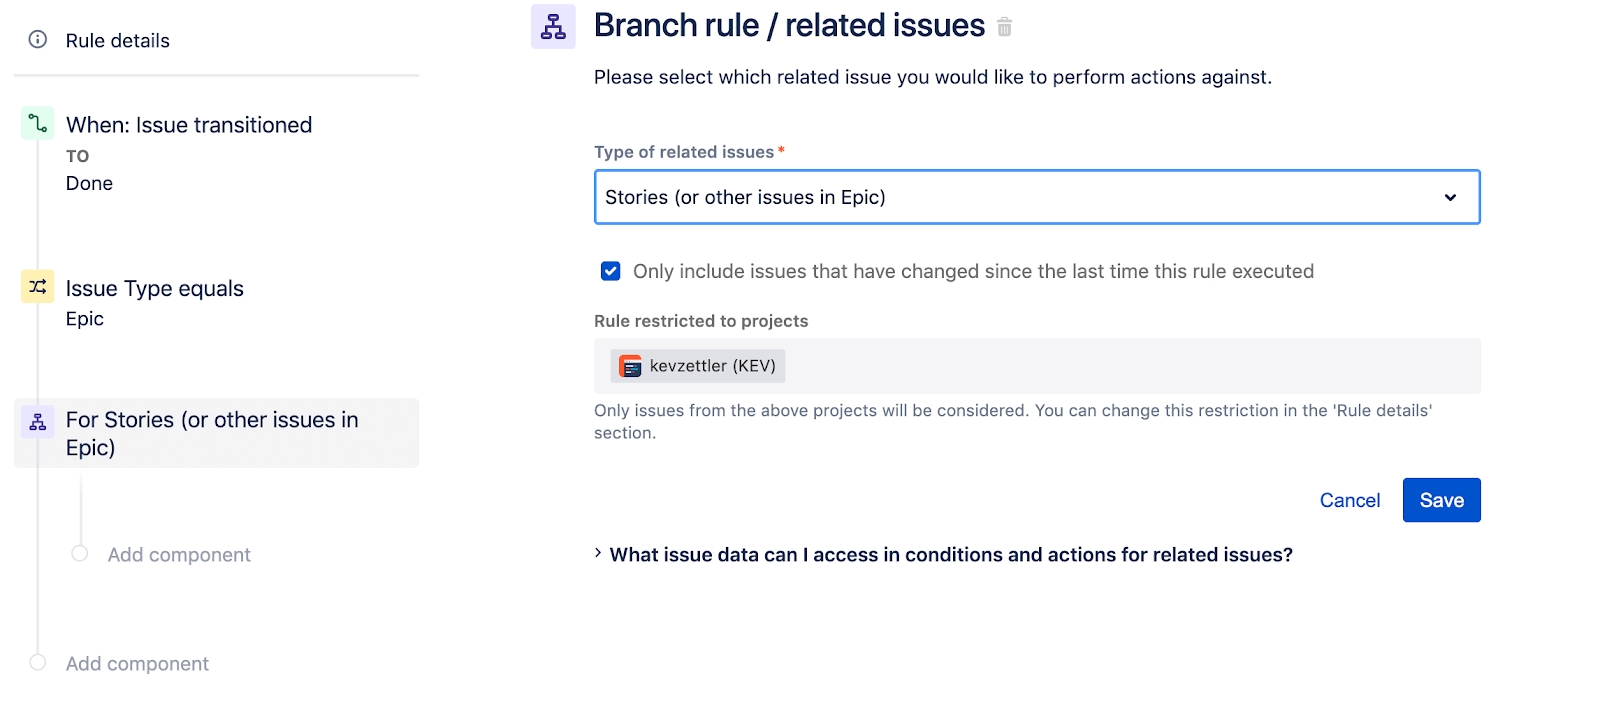 Branch rule and related issues screen